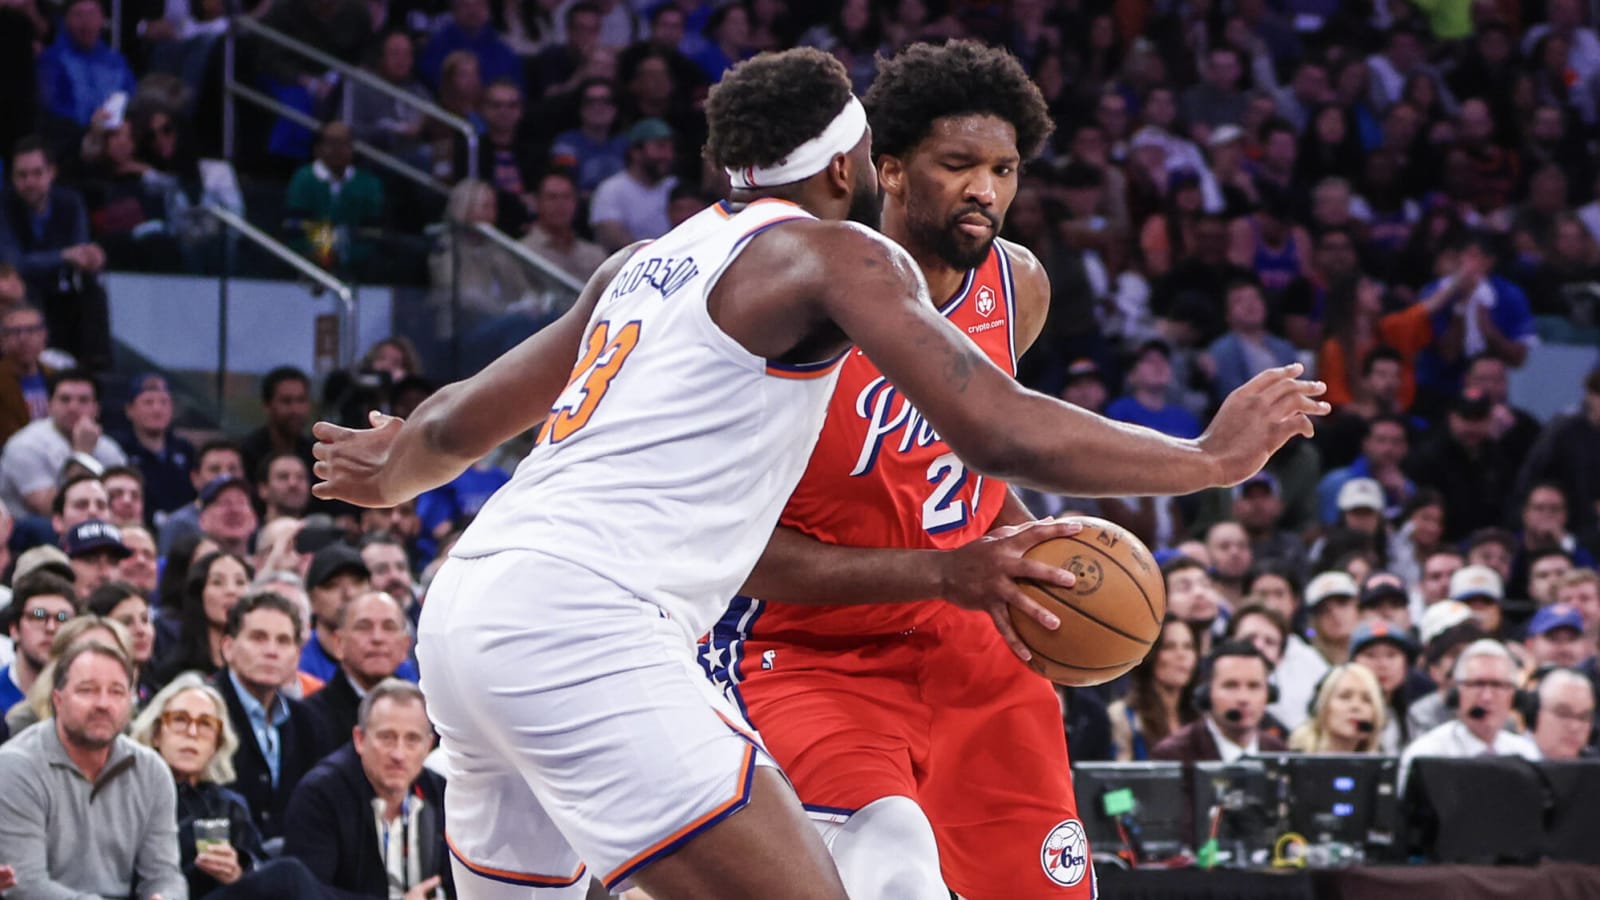 76ers might regret not stealing Game 1 against the Knicks